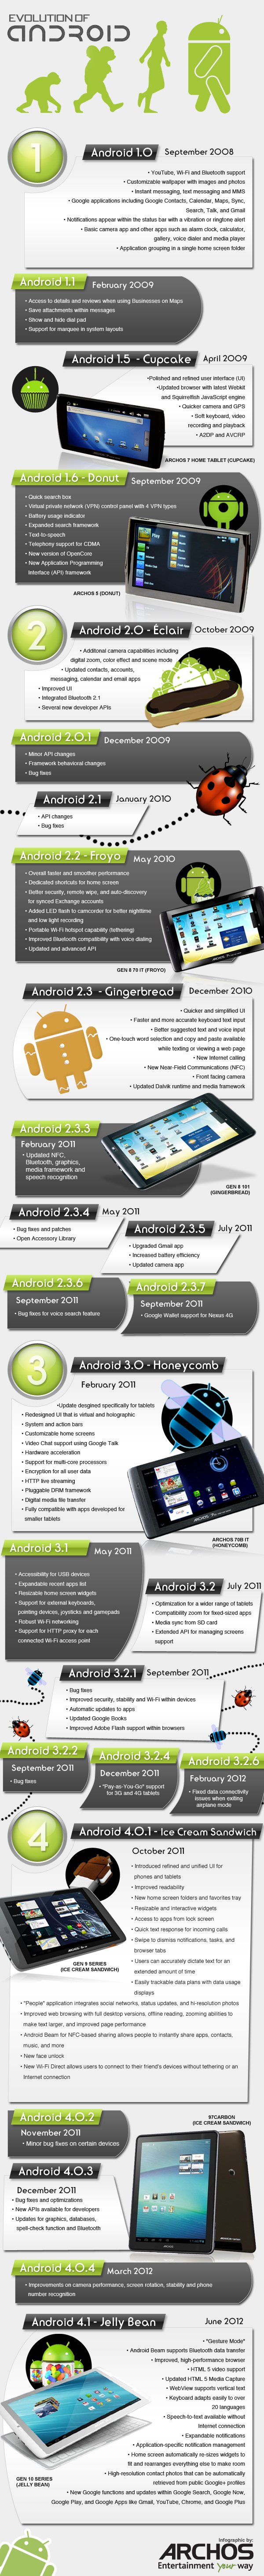 evolution-of-android